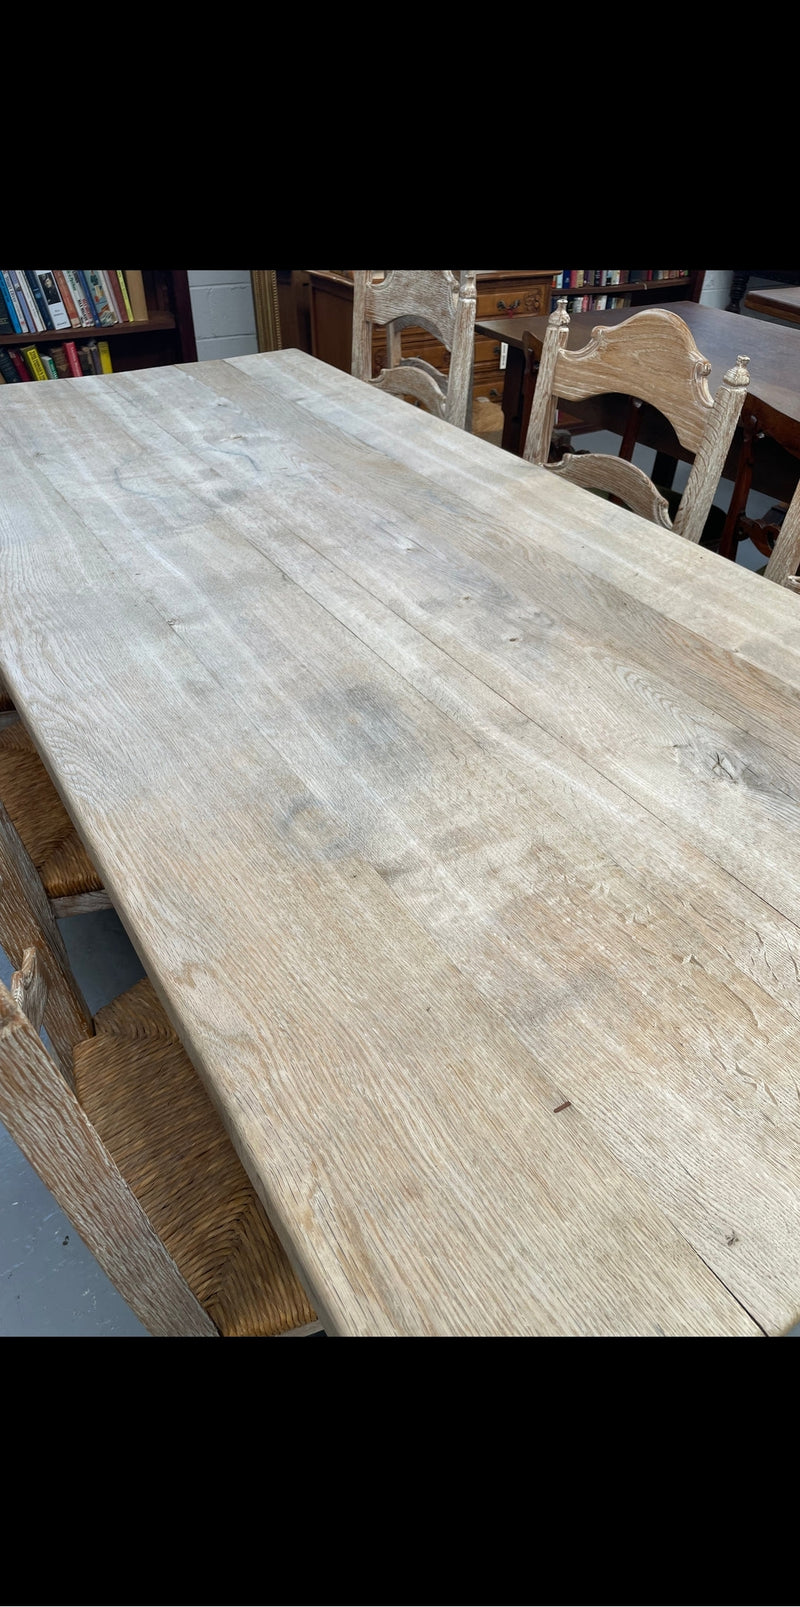 Sourced from France a raw French Oak pedestal dining table. This stunning table features raw oak timber that could be used as is for a distressed look, or finished and waxed for a more refined look. It is in good solid original condition.